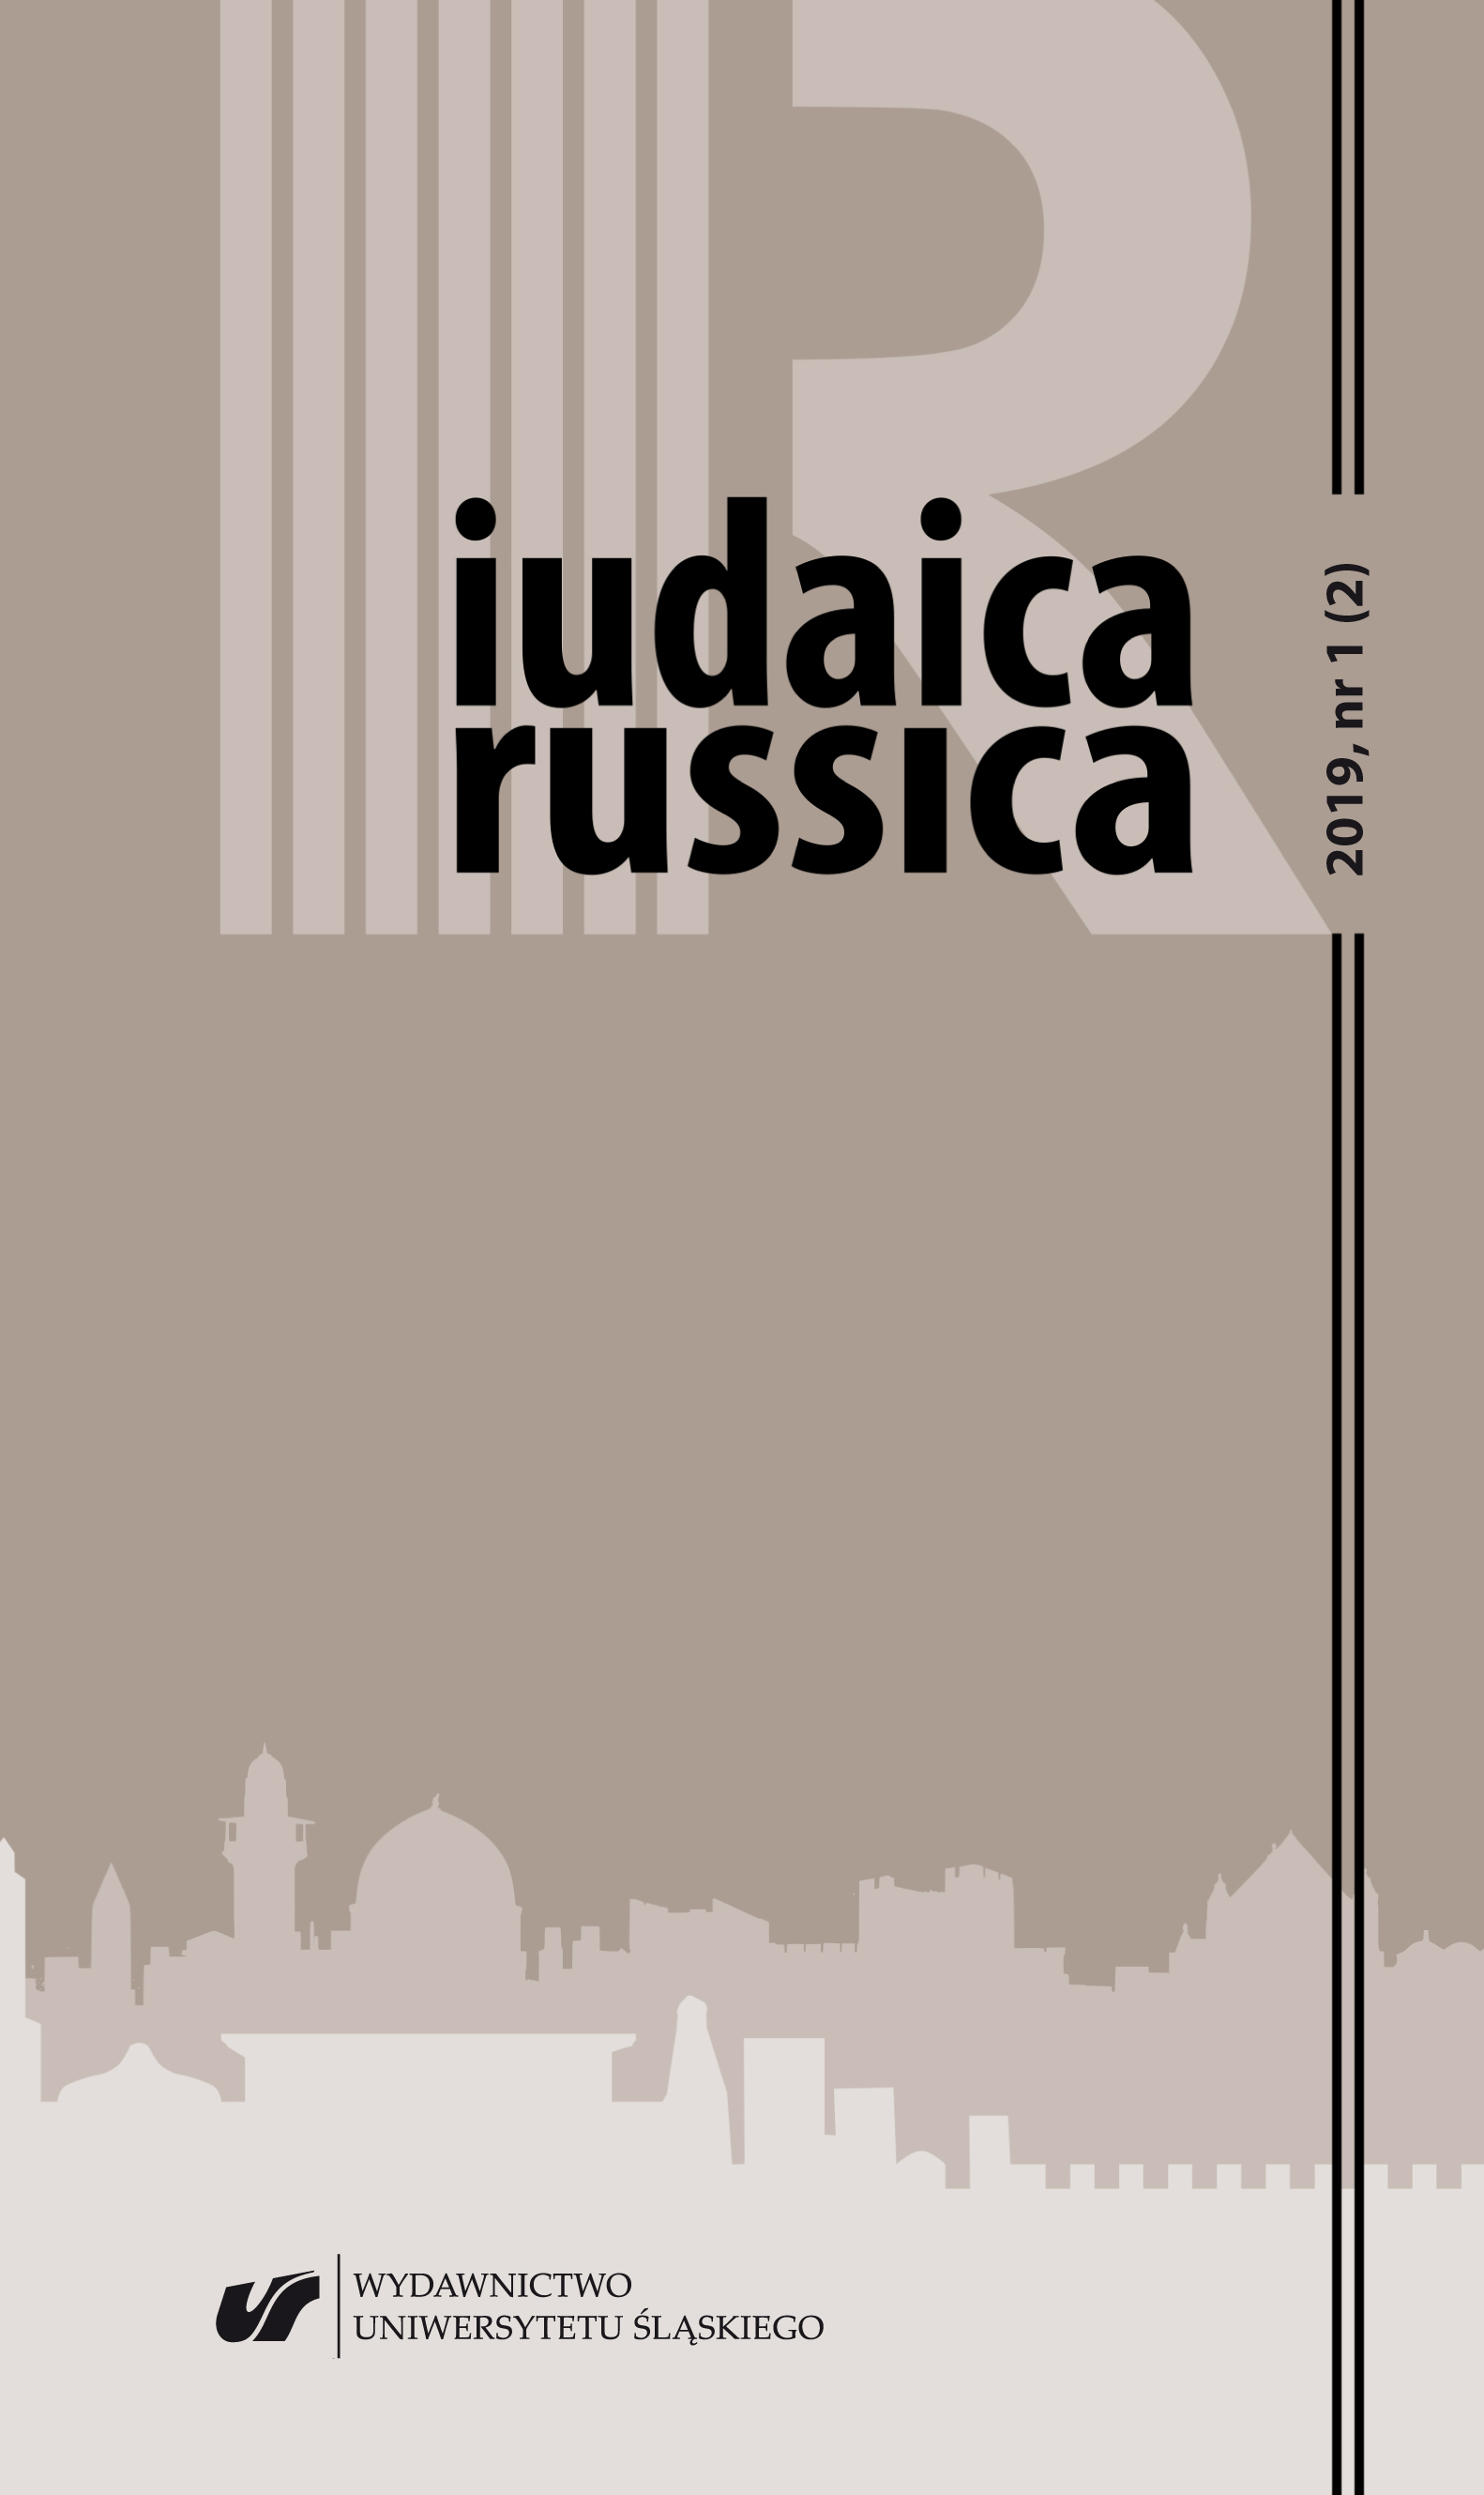 The semantics of raising of the Judaic tradition and its Russian depiction Cover Image